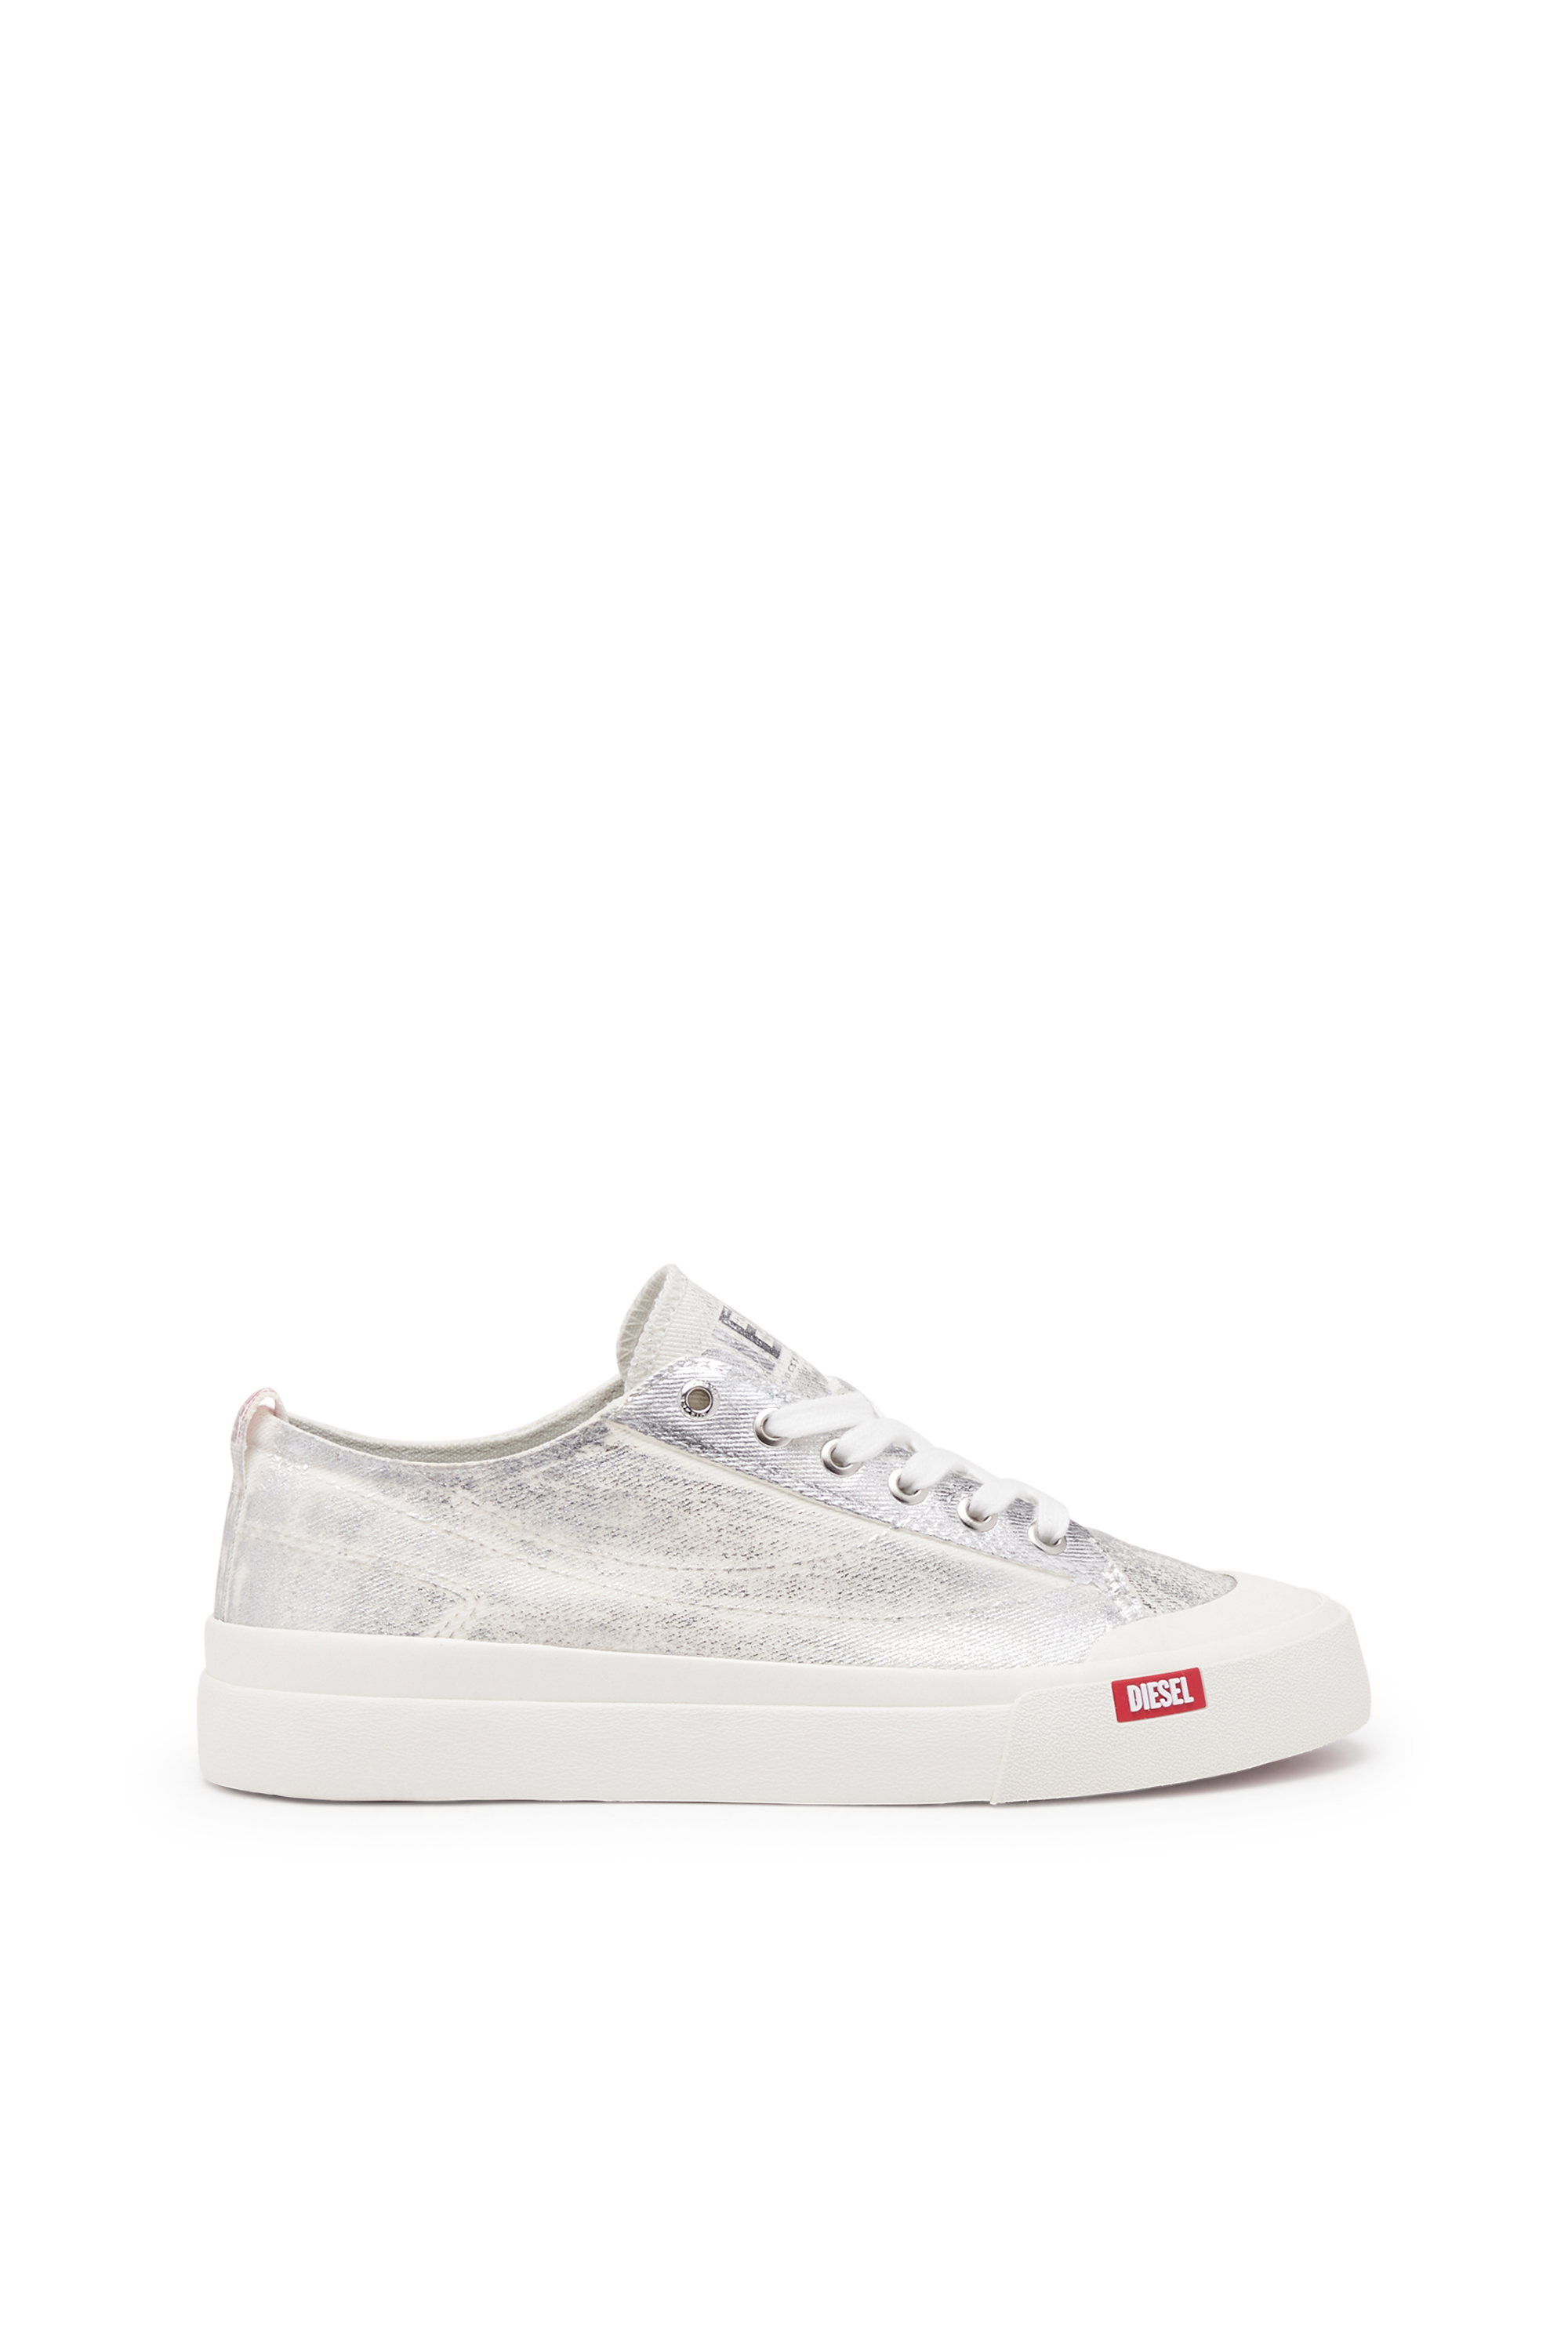 Diesel - S-Athos Low-Sneaker in canvas metallizzato distressed - Sneakers - Donna - Argento